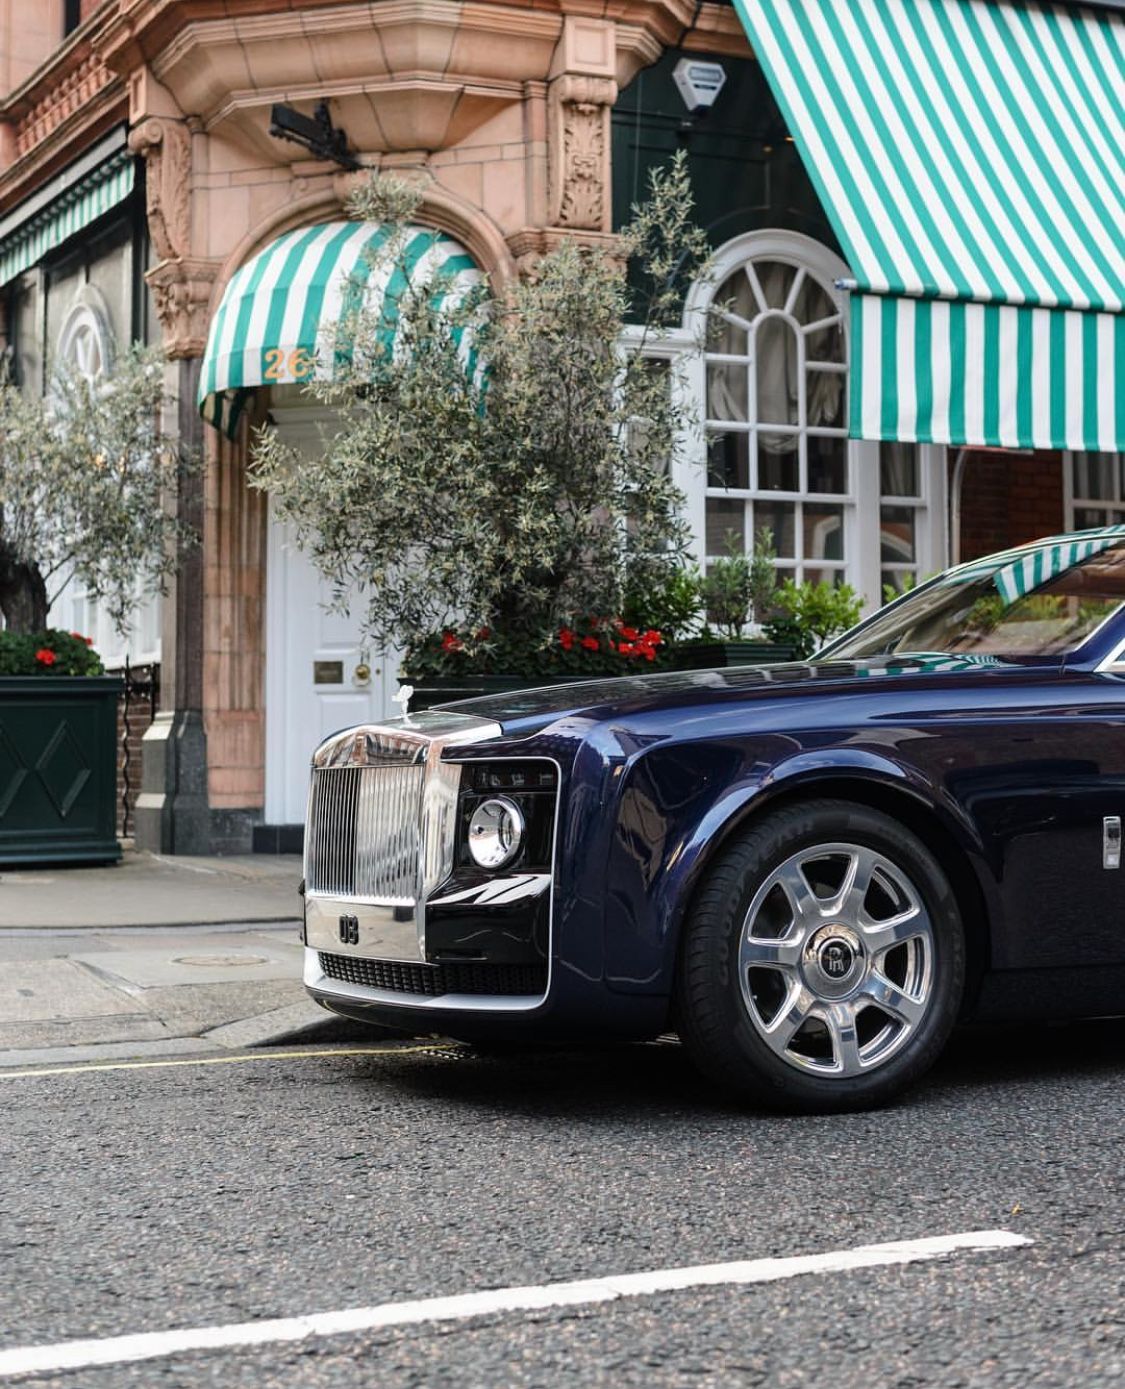 At the time of its may 2017 debut at the yearly . Rolls-Royce Sweptail | Ð­ÐºÐ·Ð¾ÑÐ¸ÑÐµÑÐºÐ¸Ðµ Ð°Ð²ÑÐ¾Ð¼Ð¾Ð±Ð¸Ð»Ð¸, ÐÐ²ÑÐ¾Ð¼Ð¾Ð±Ð¸Ð»Ð¸